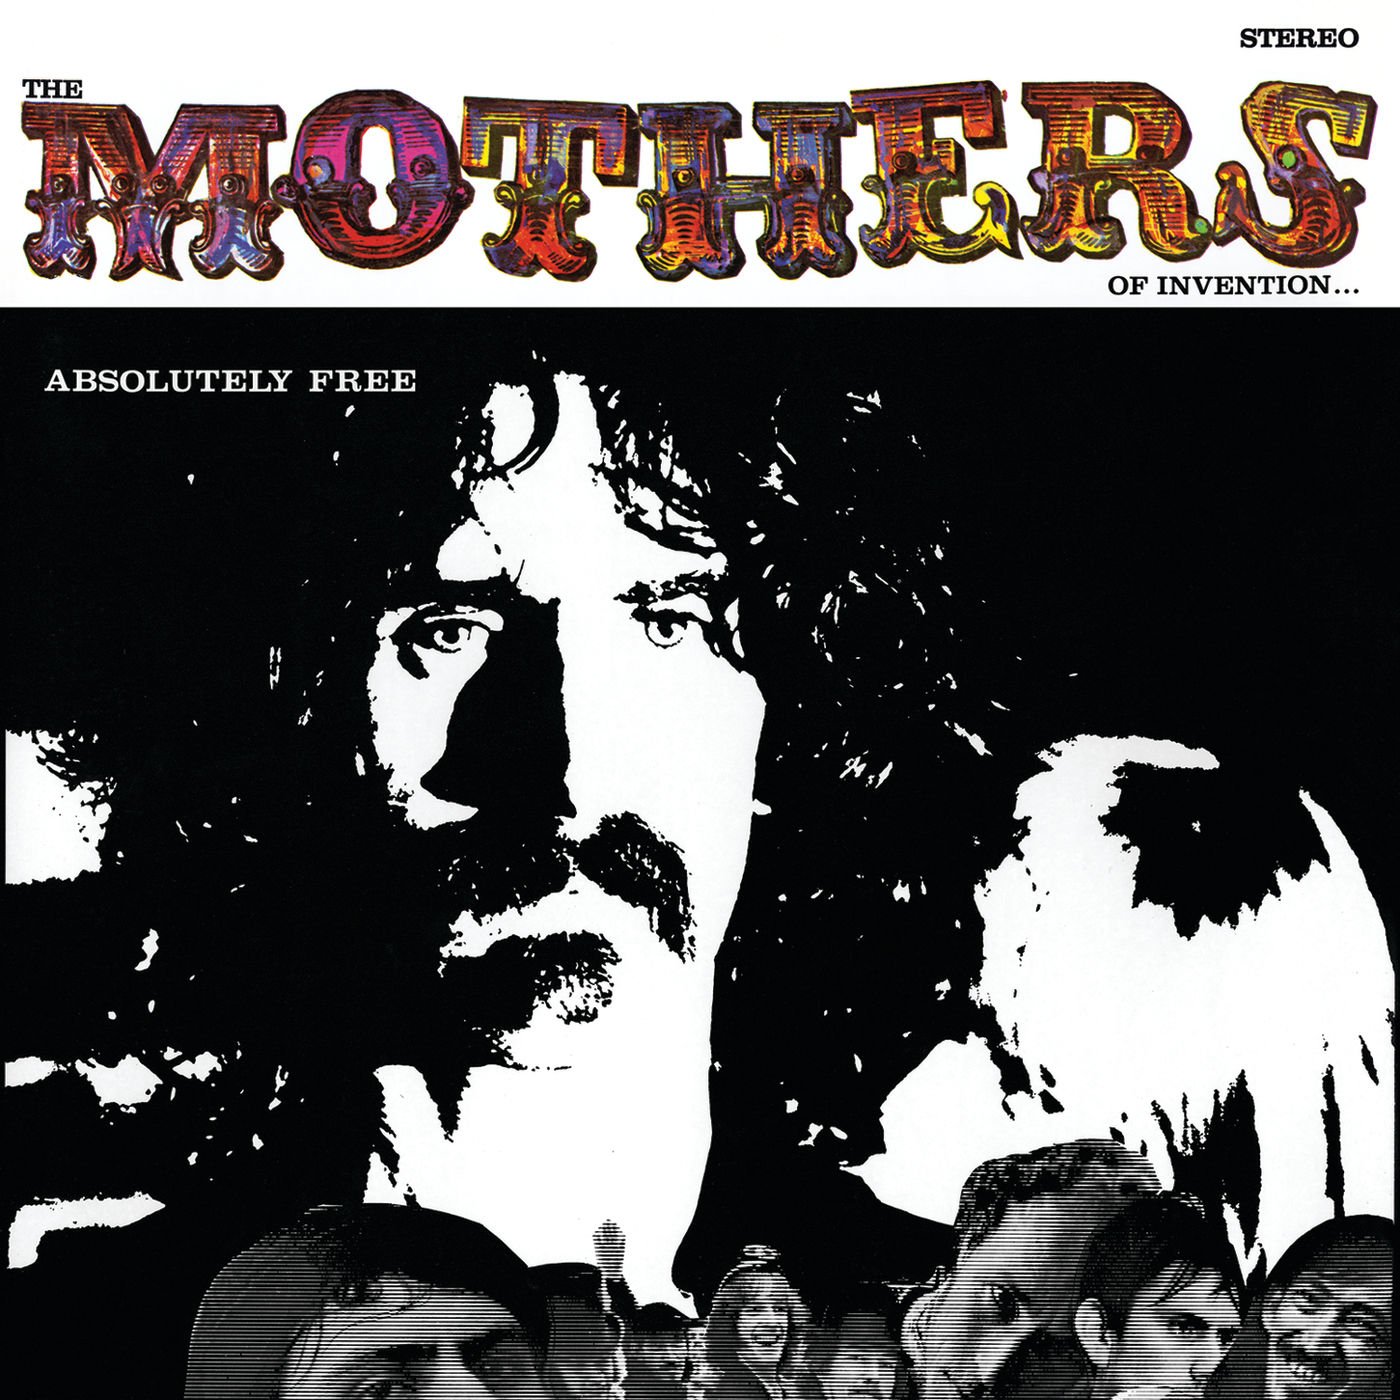 Frank Zappa and The Mothers Of Invention-Absolutely Free-24-192-WEB-FLAC-REMASTERED-2021-OBZEN Download